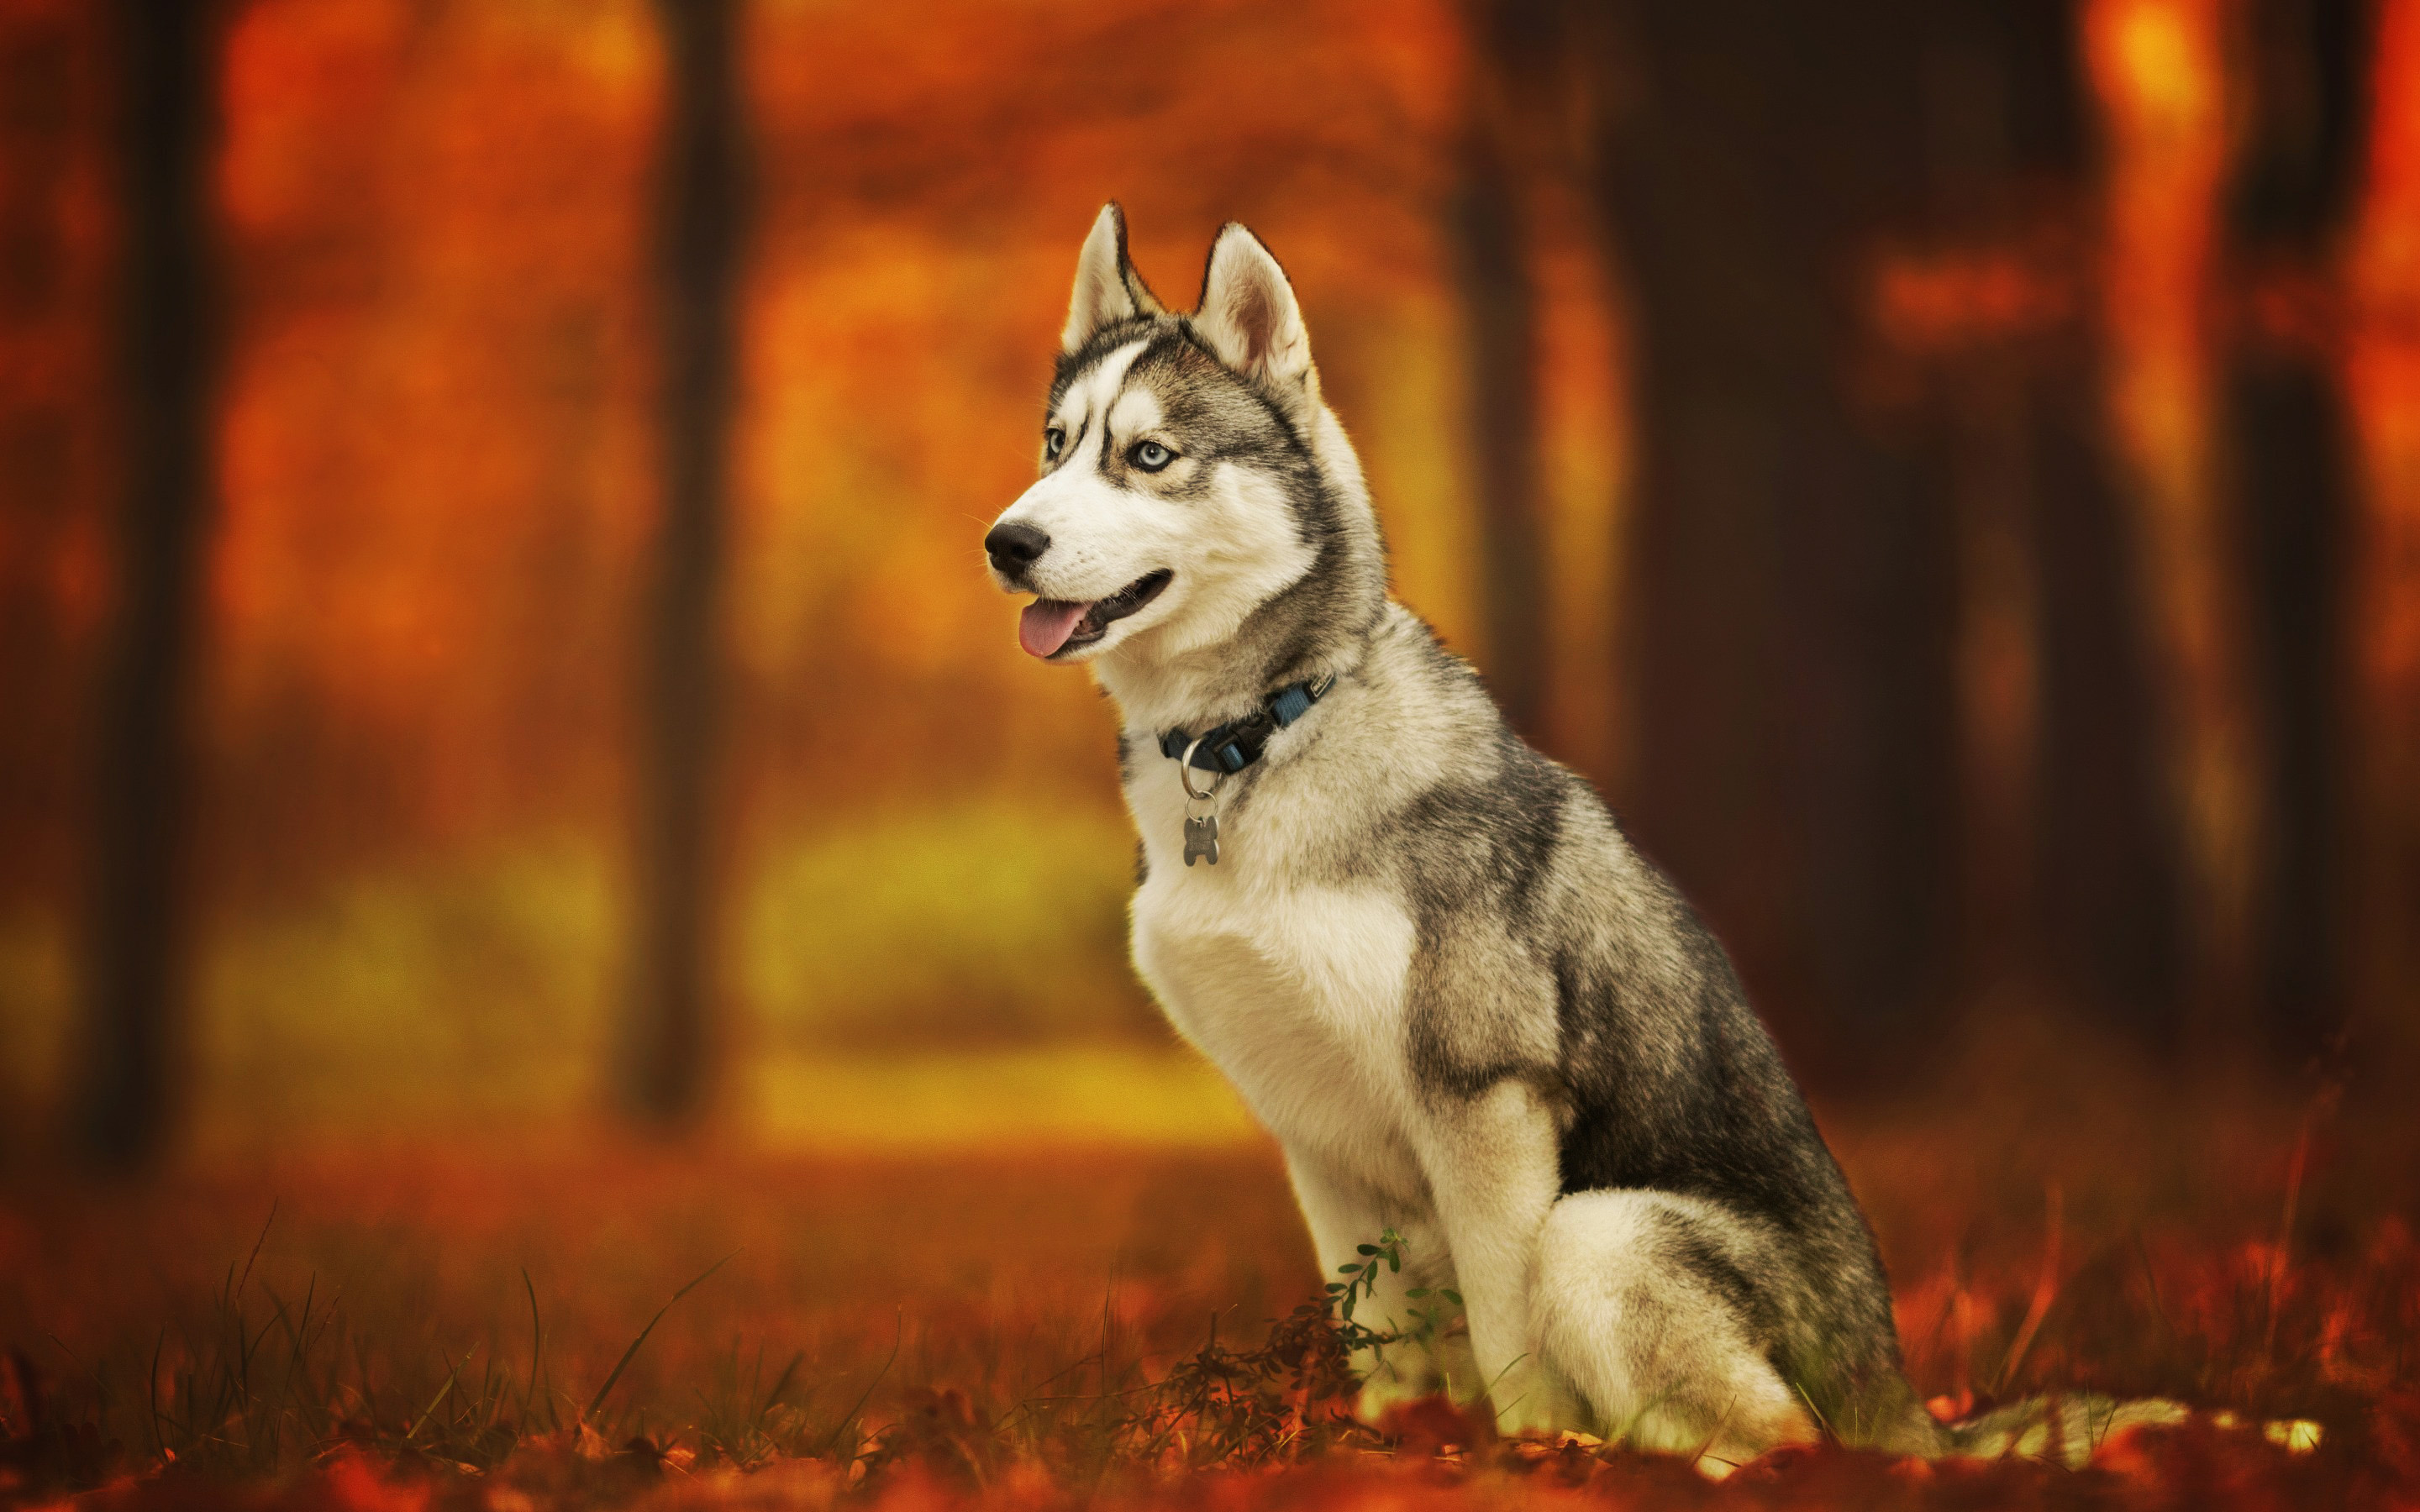 Siberian husky in autumn, Cute and playful, Beautiful forest scene, High-quality HD pictures, 2880x1800 HD Desktop